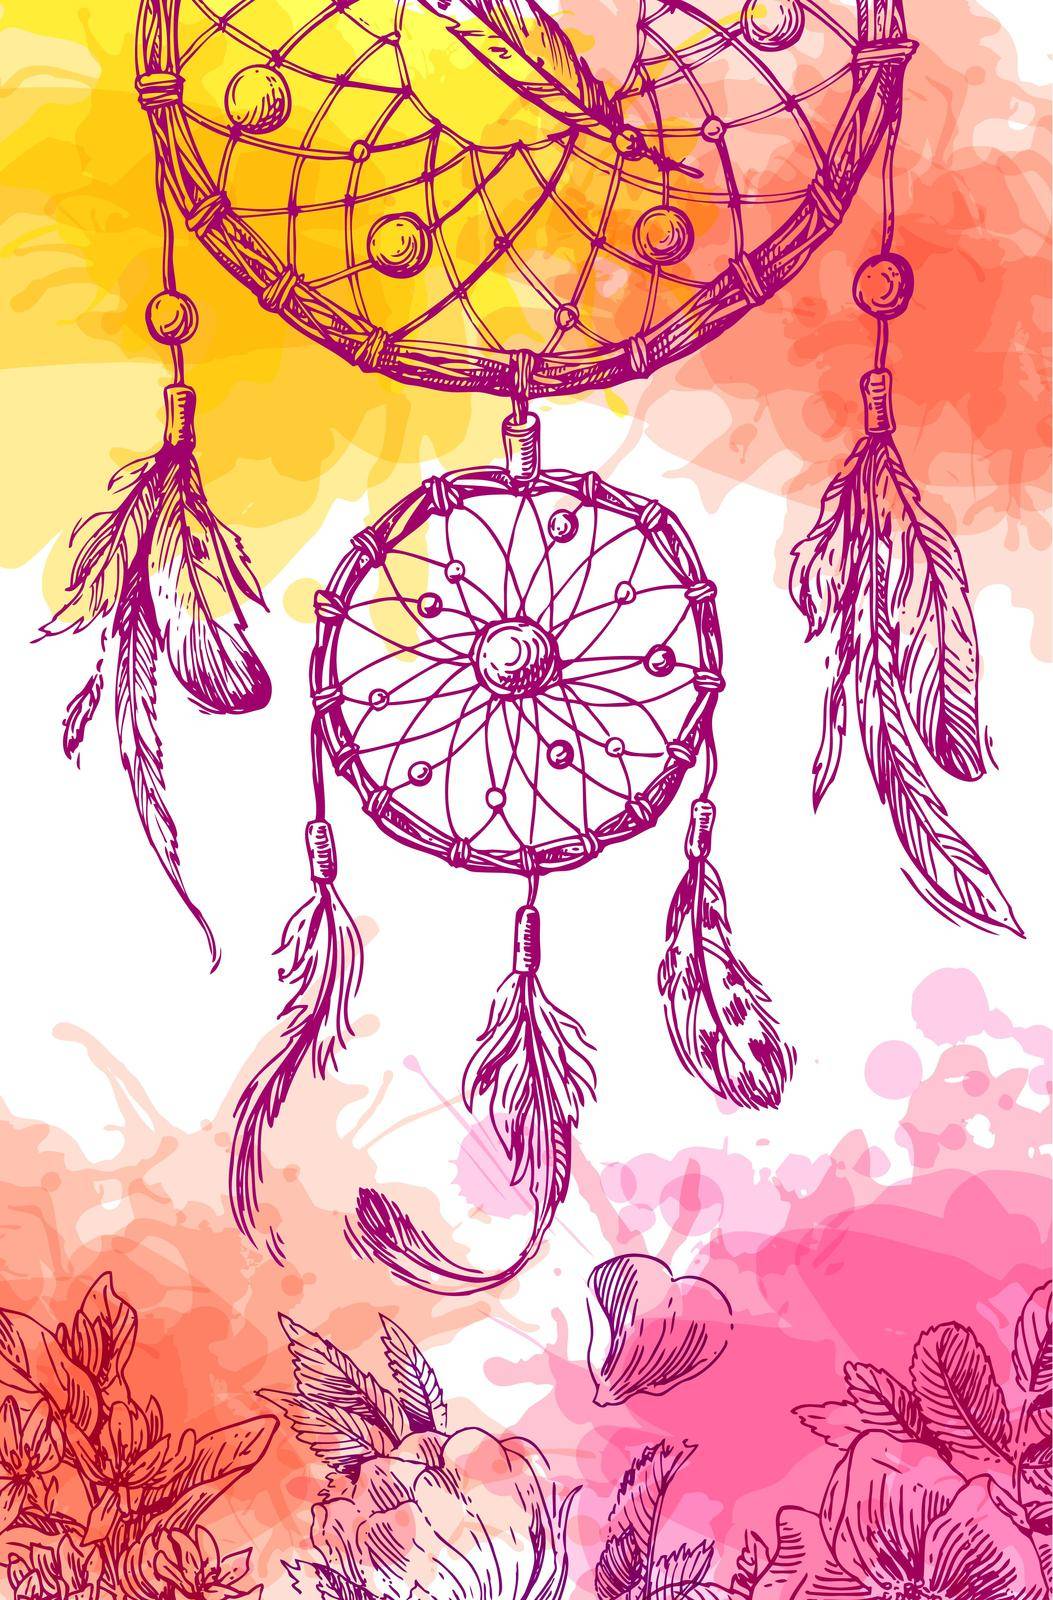 Beautiful hand drawn vector boho style illustration of dreamcatcher. Use for postcards, print for t-shirts, posters, wedding invitation, tissue, linens